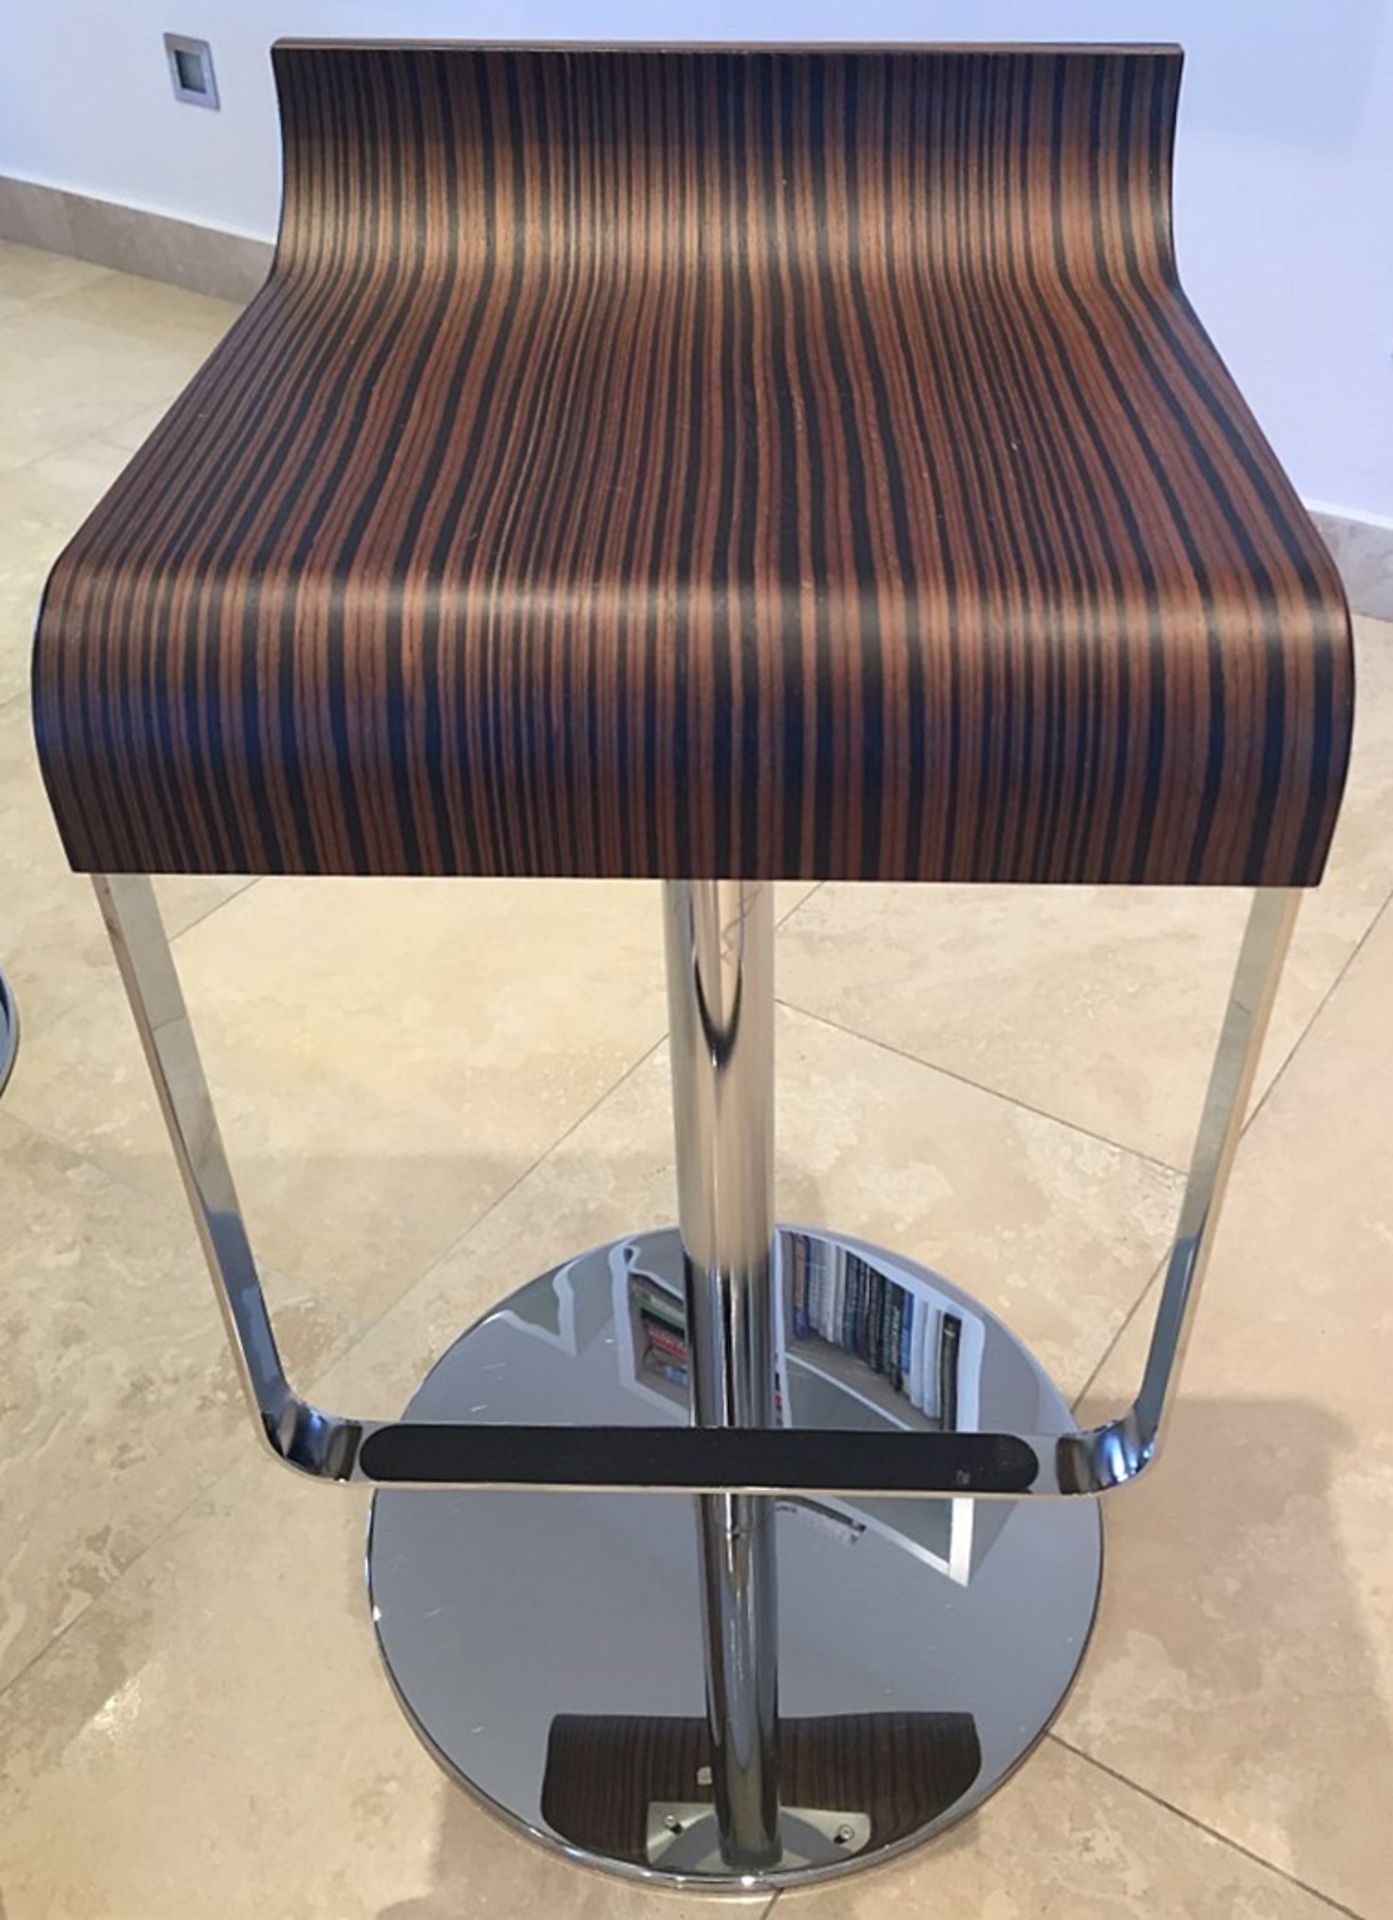 1 x Pair Of Matching Designer Calligaris "Mood" Gas Lift Stools - Both Supplied In Good Condition